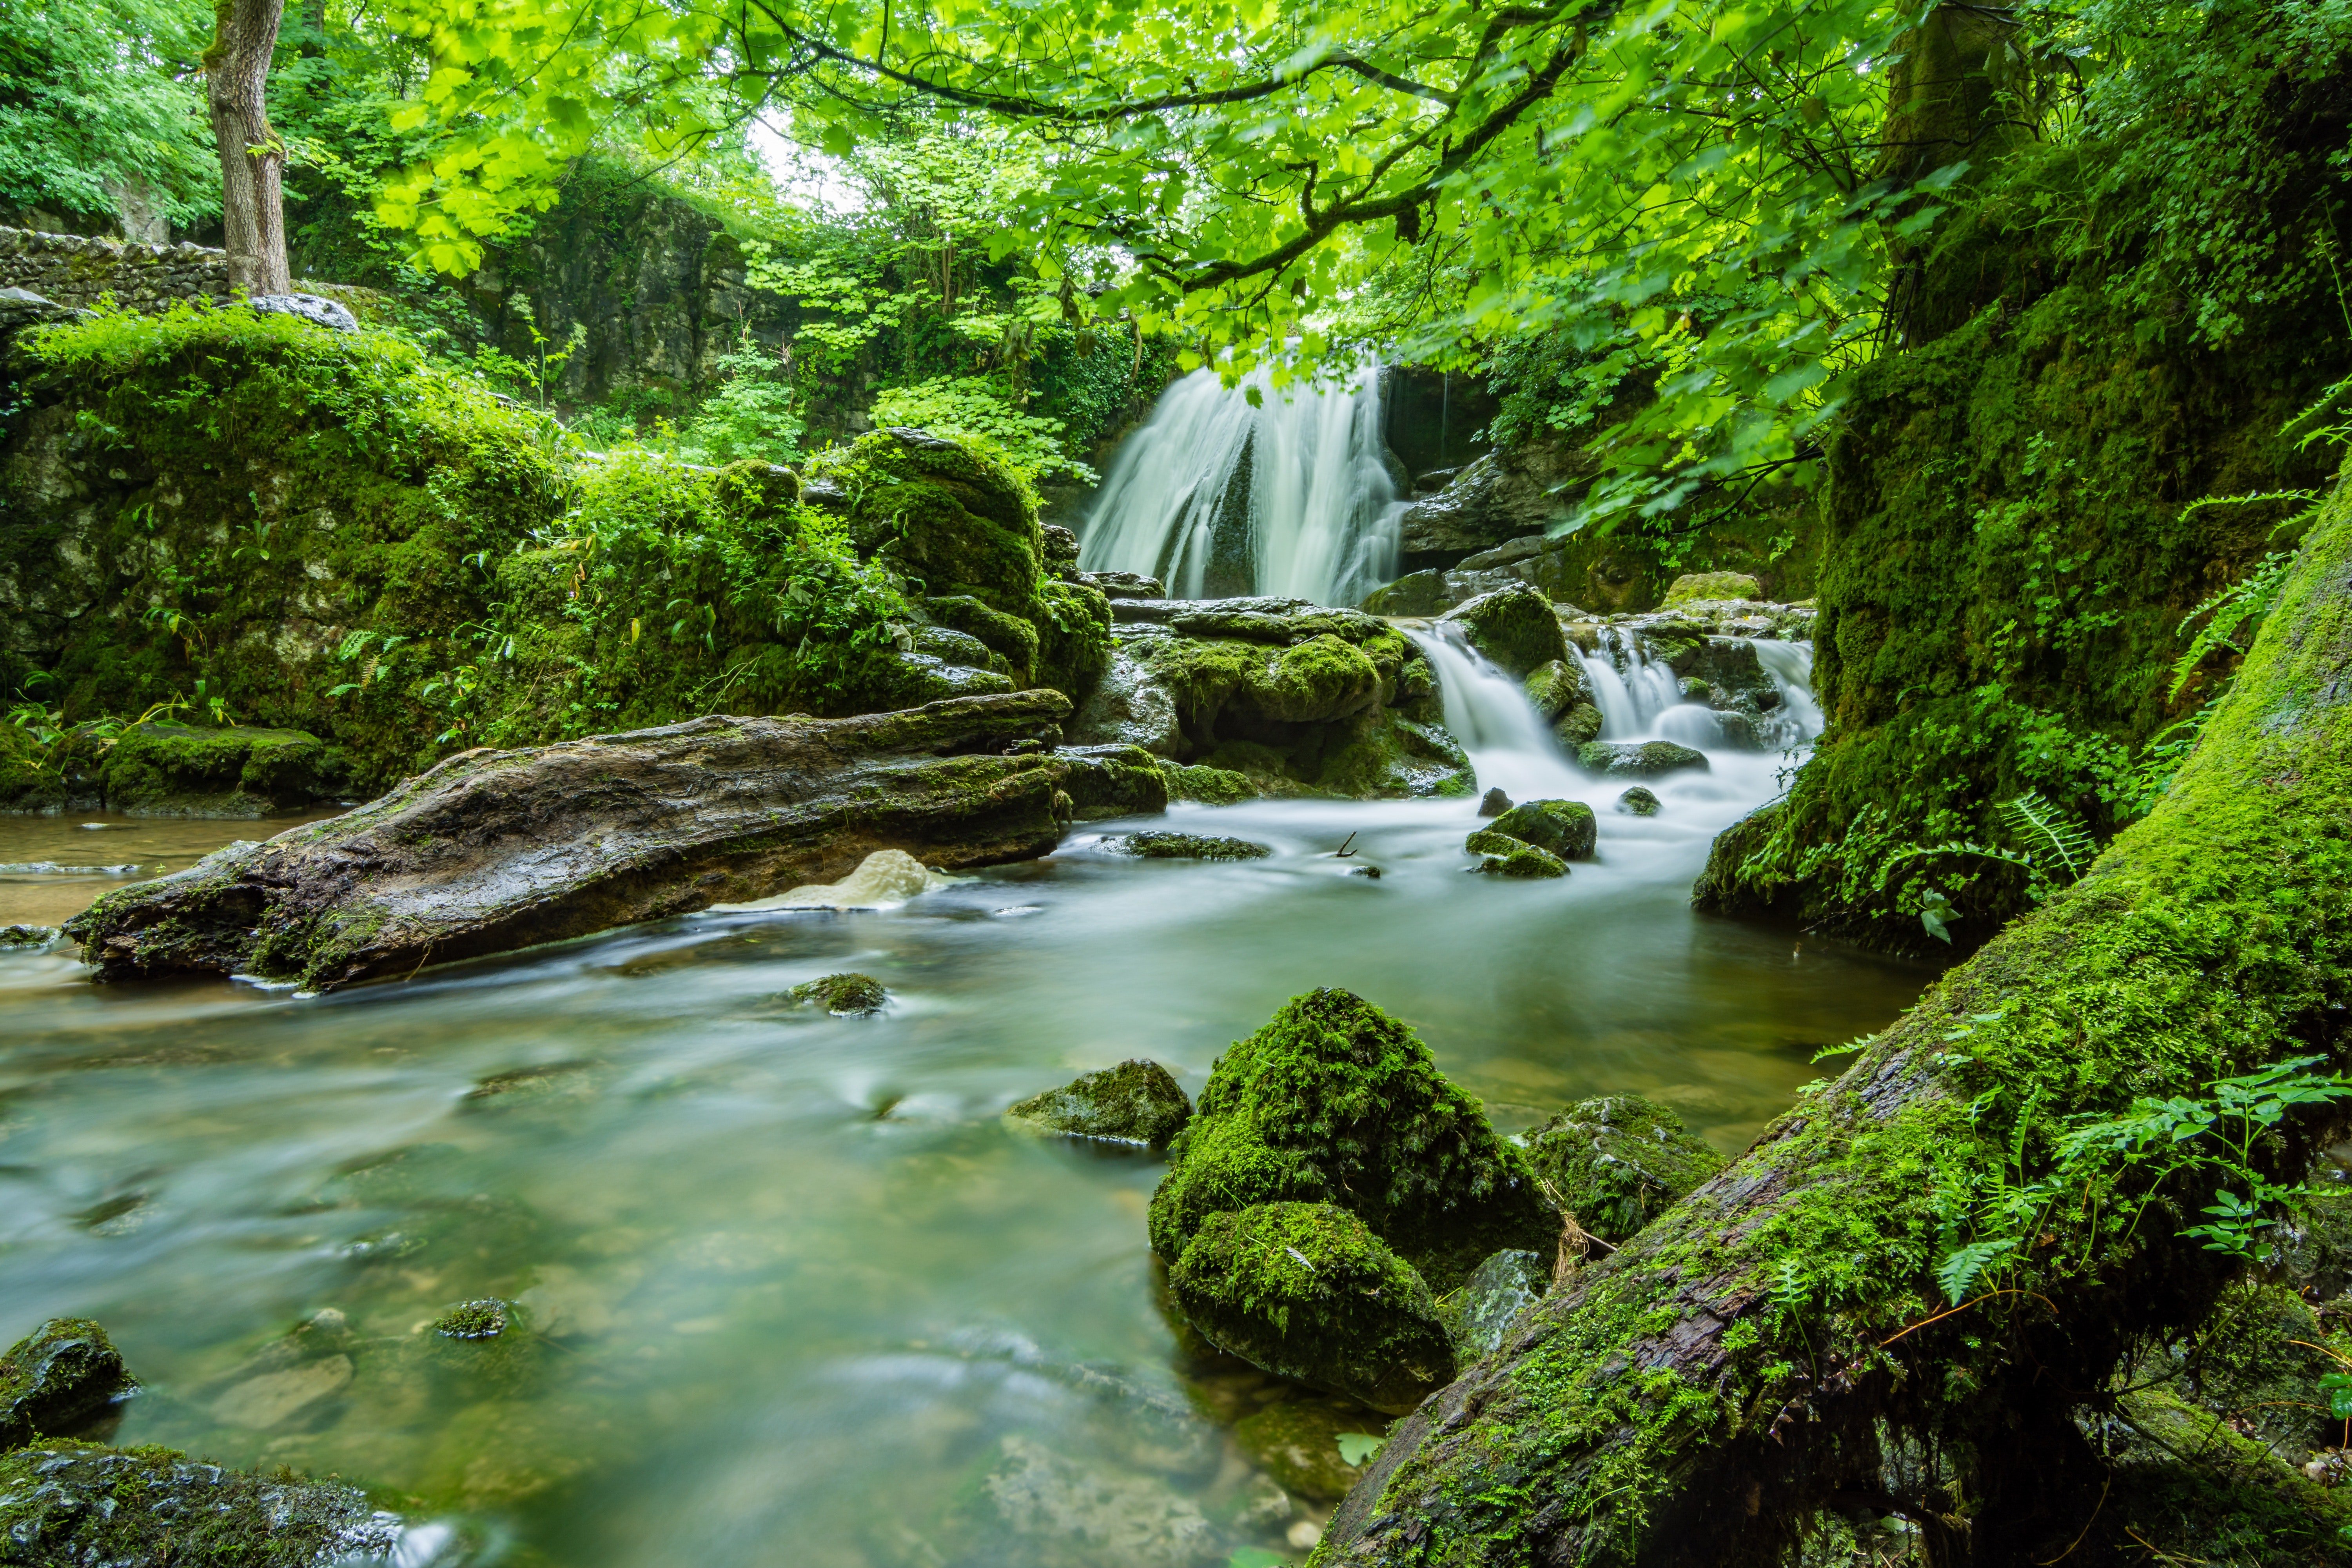 Pictured - An image of waterfalls in a forest | Source: Pexels 